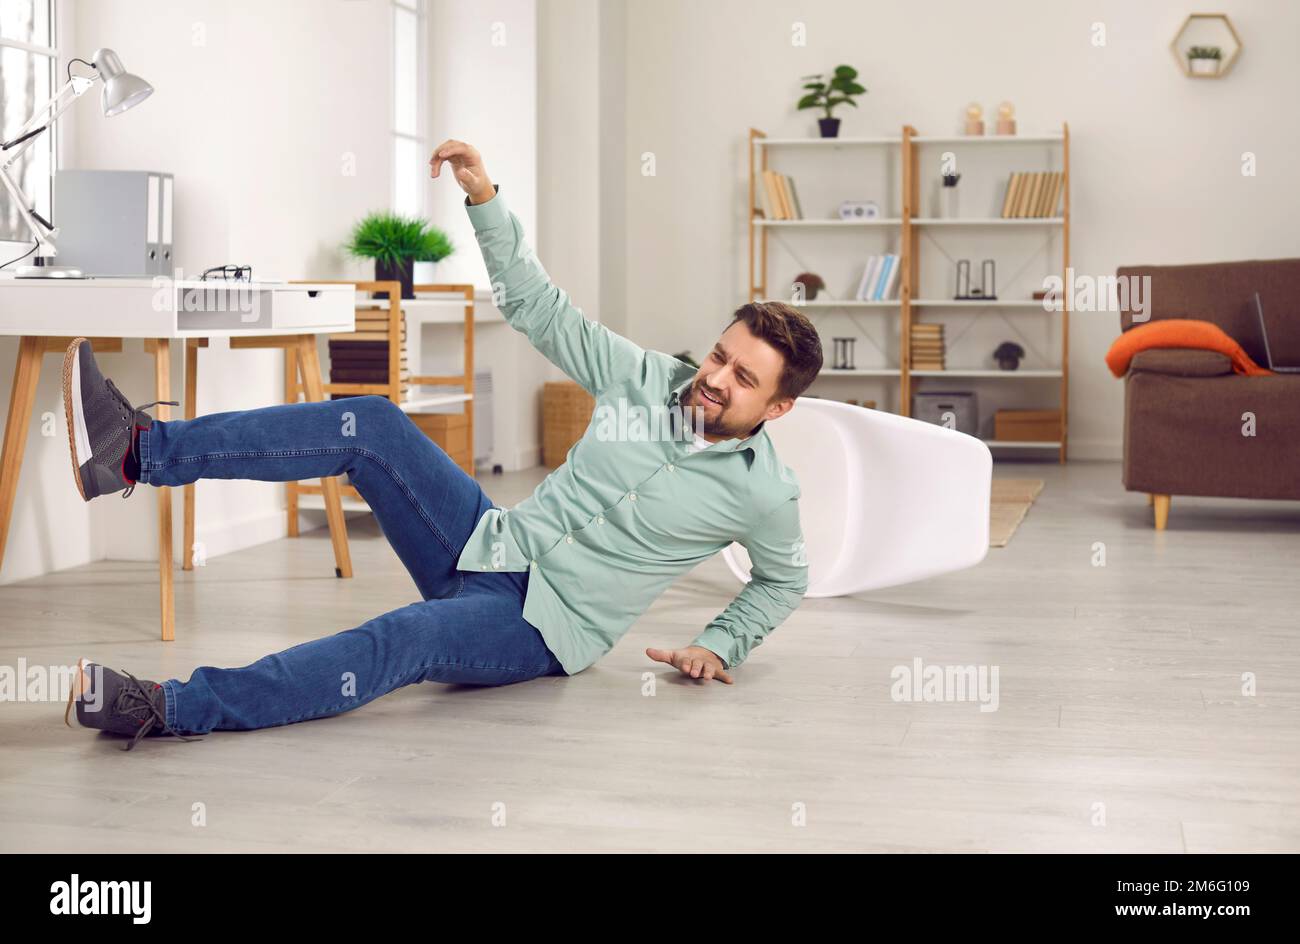 Man falls down on the floor as he misses the chair or slips on the slippery floor surface Stock Photo